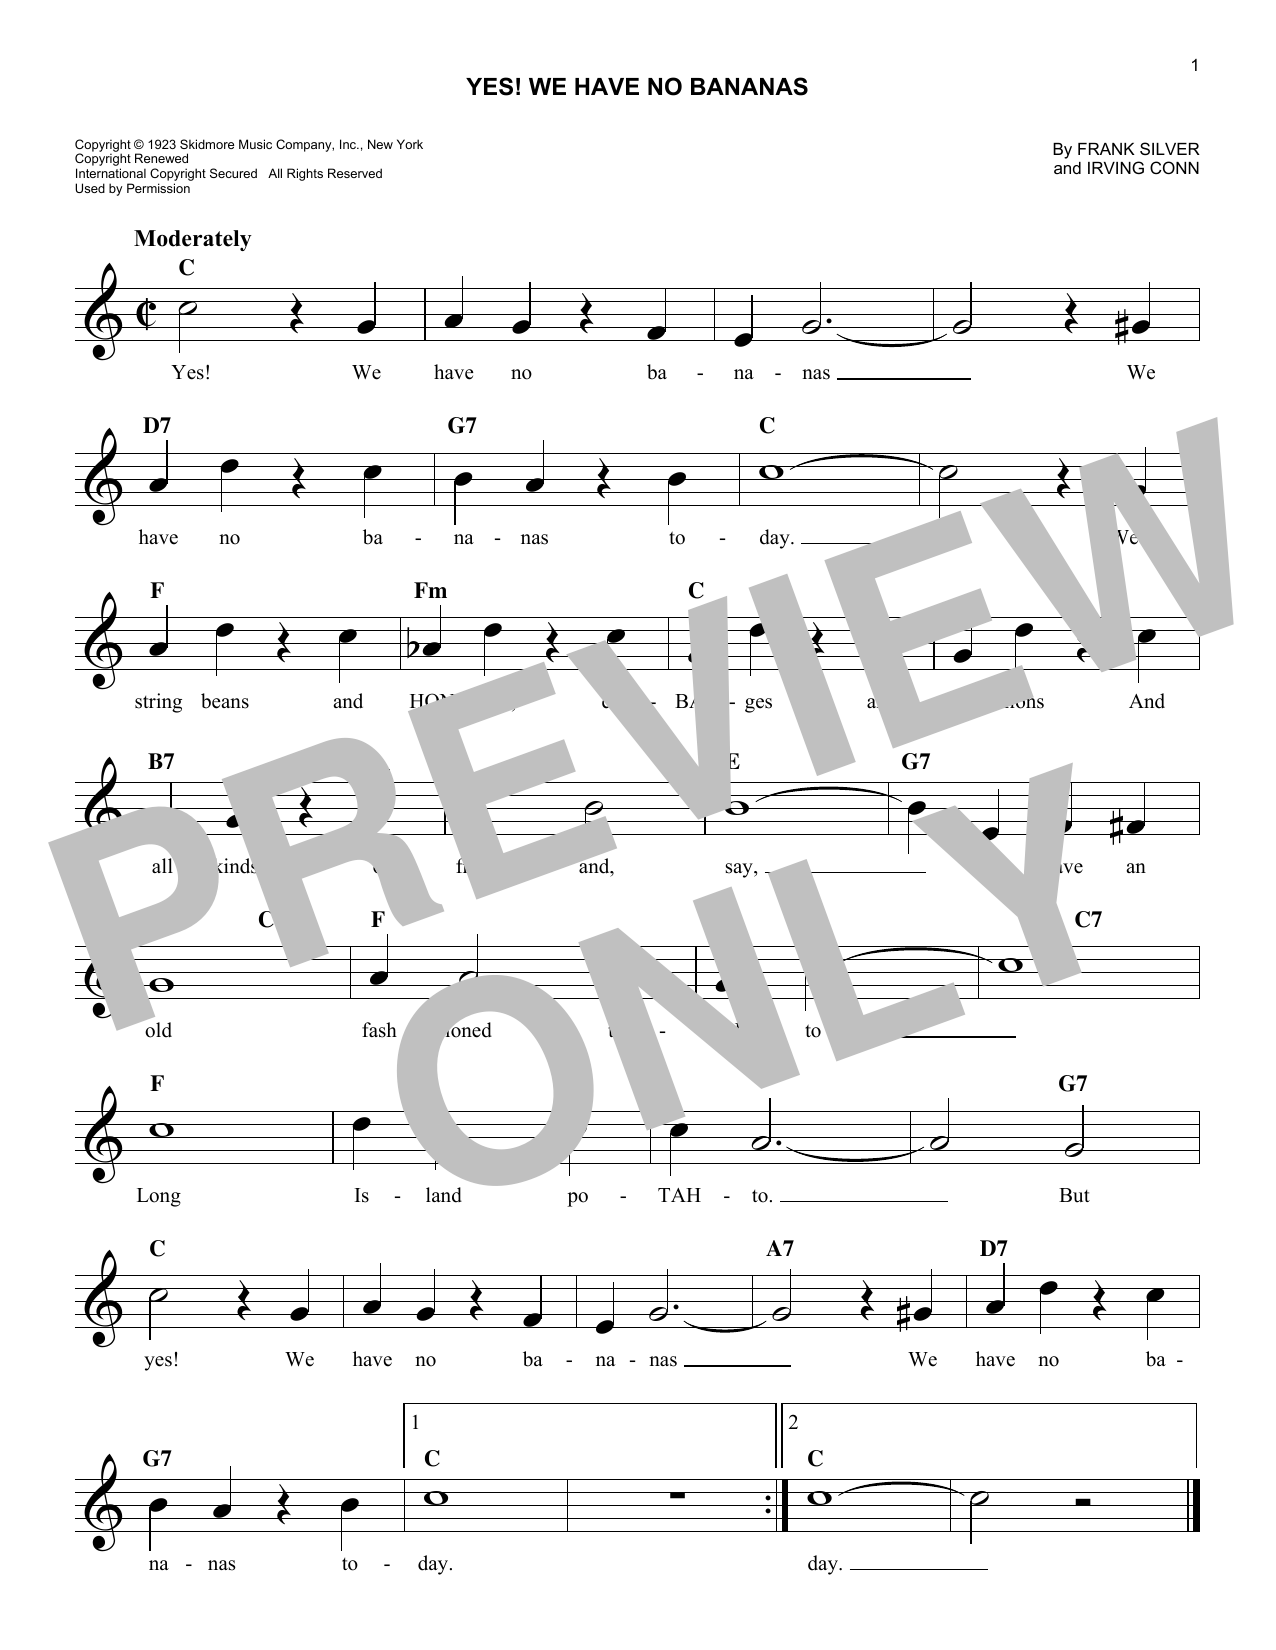 Download Irving Conn Yes! We Have No Bananas Sheet Music